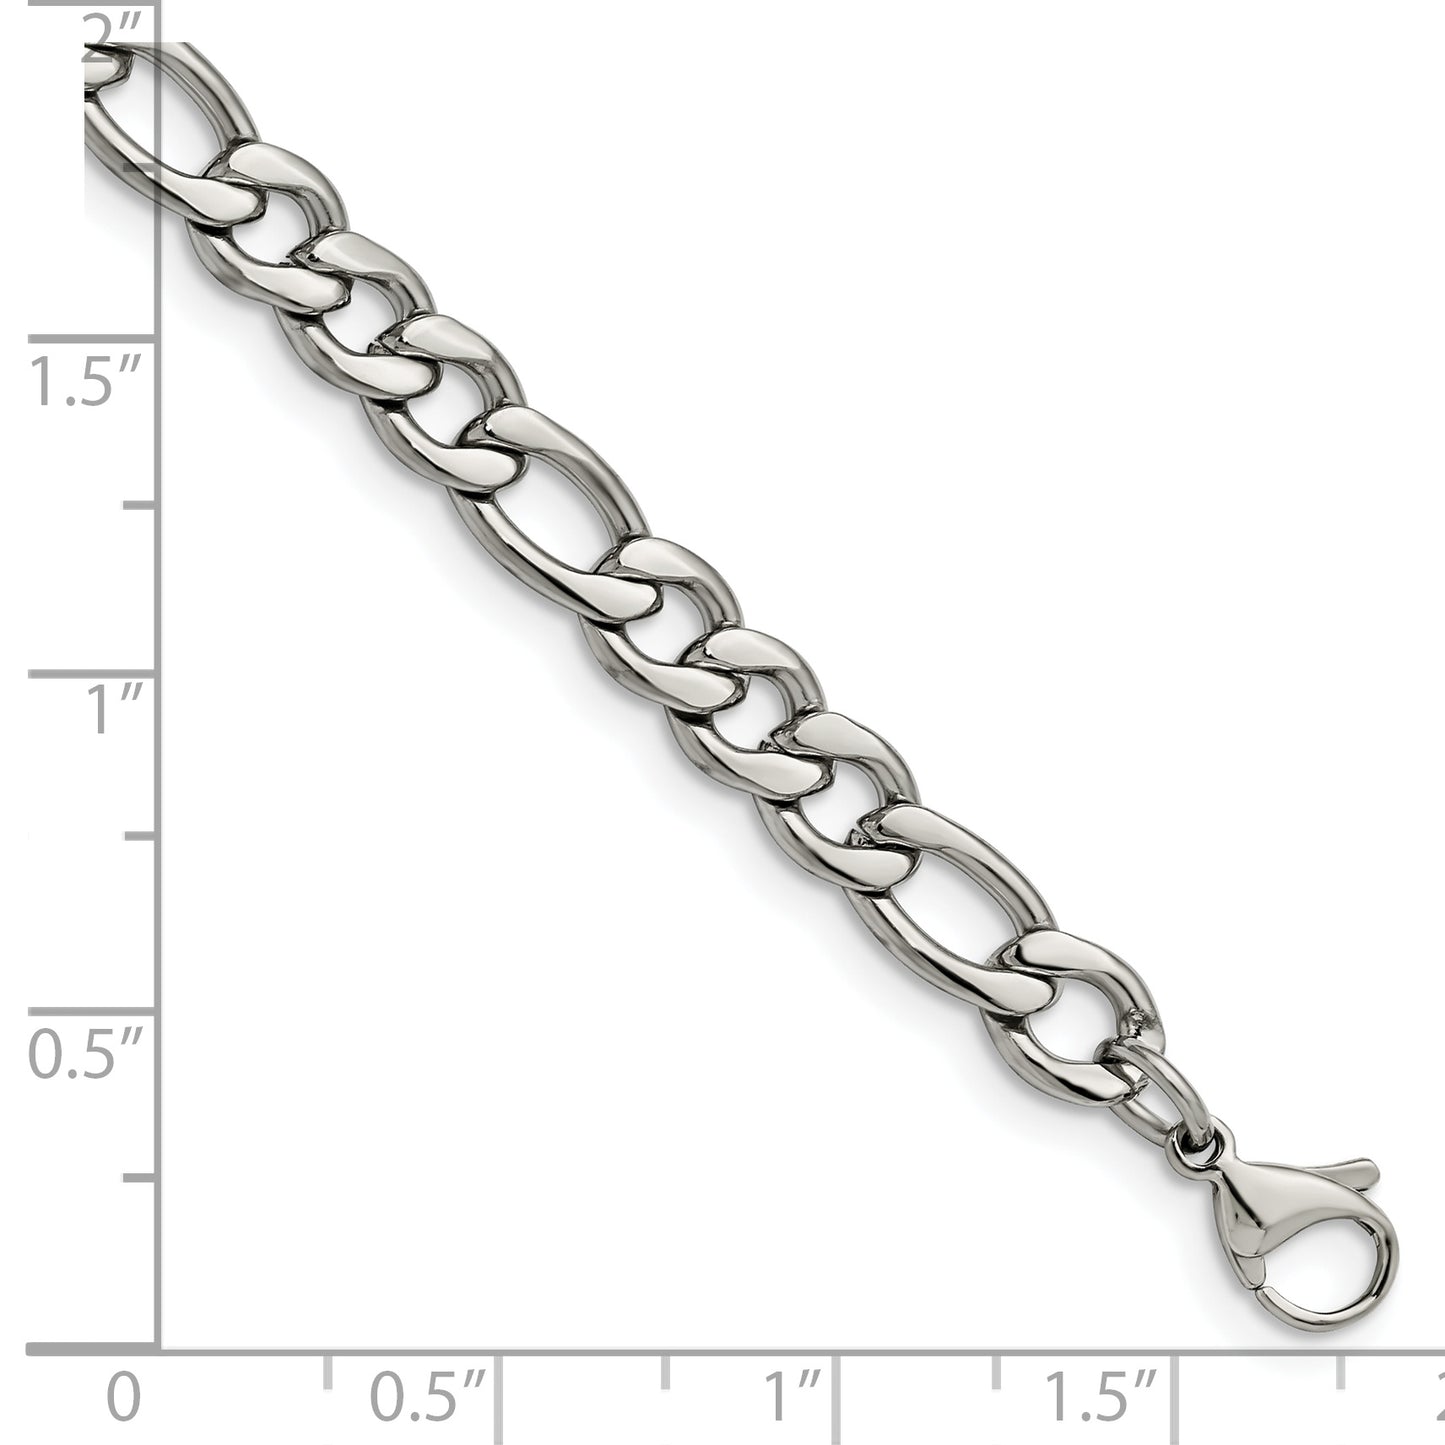 Stainless Steel Polished 6.75mm 8in Figaro Chain